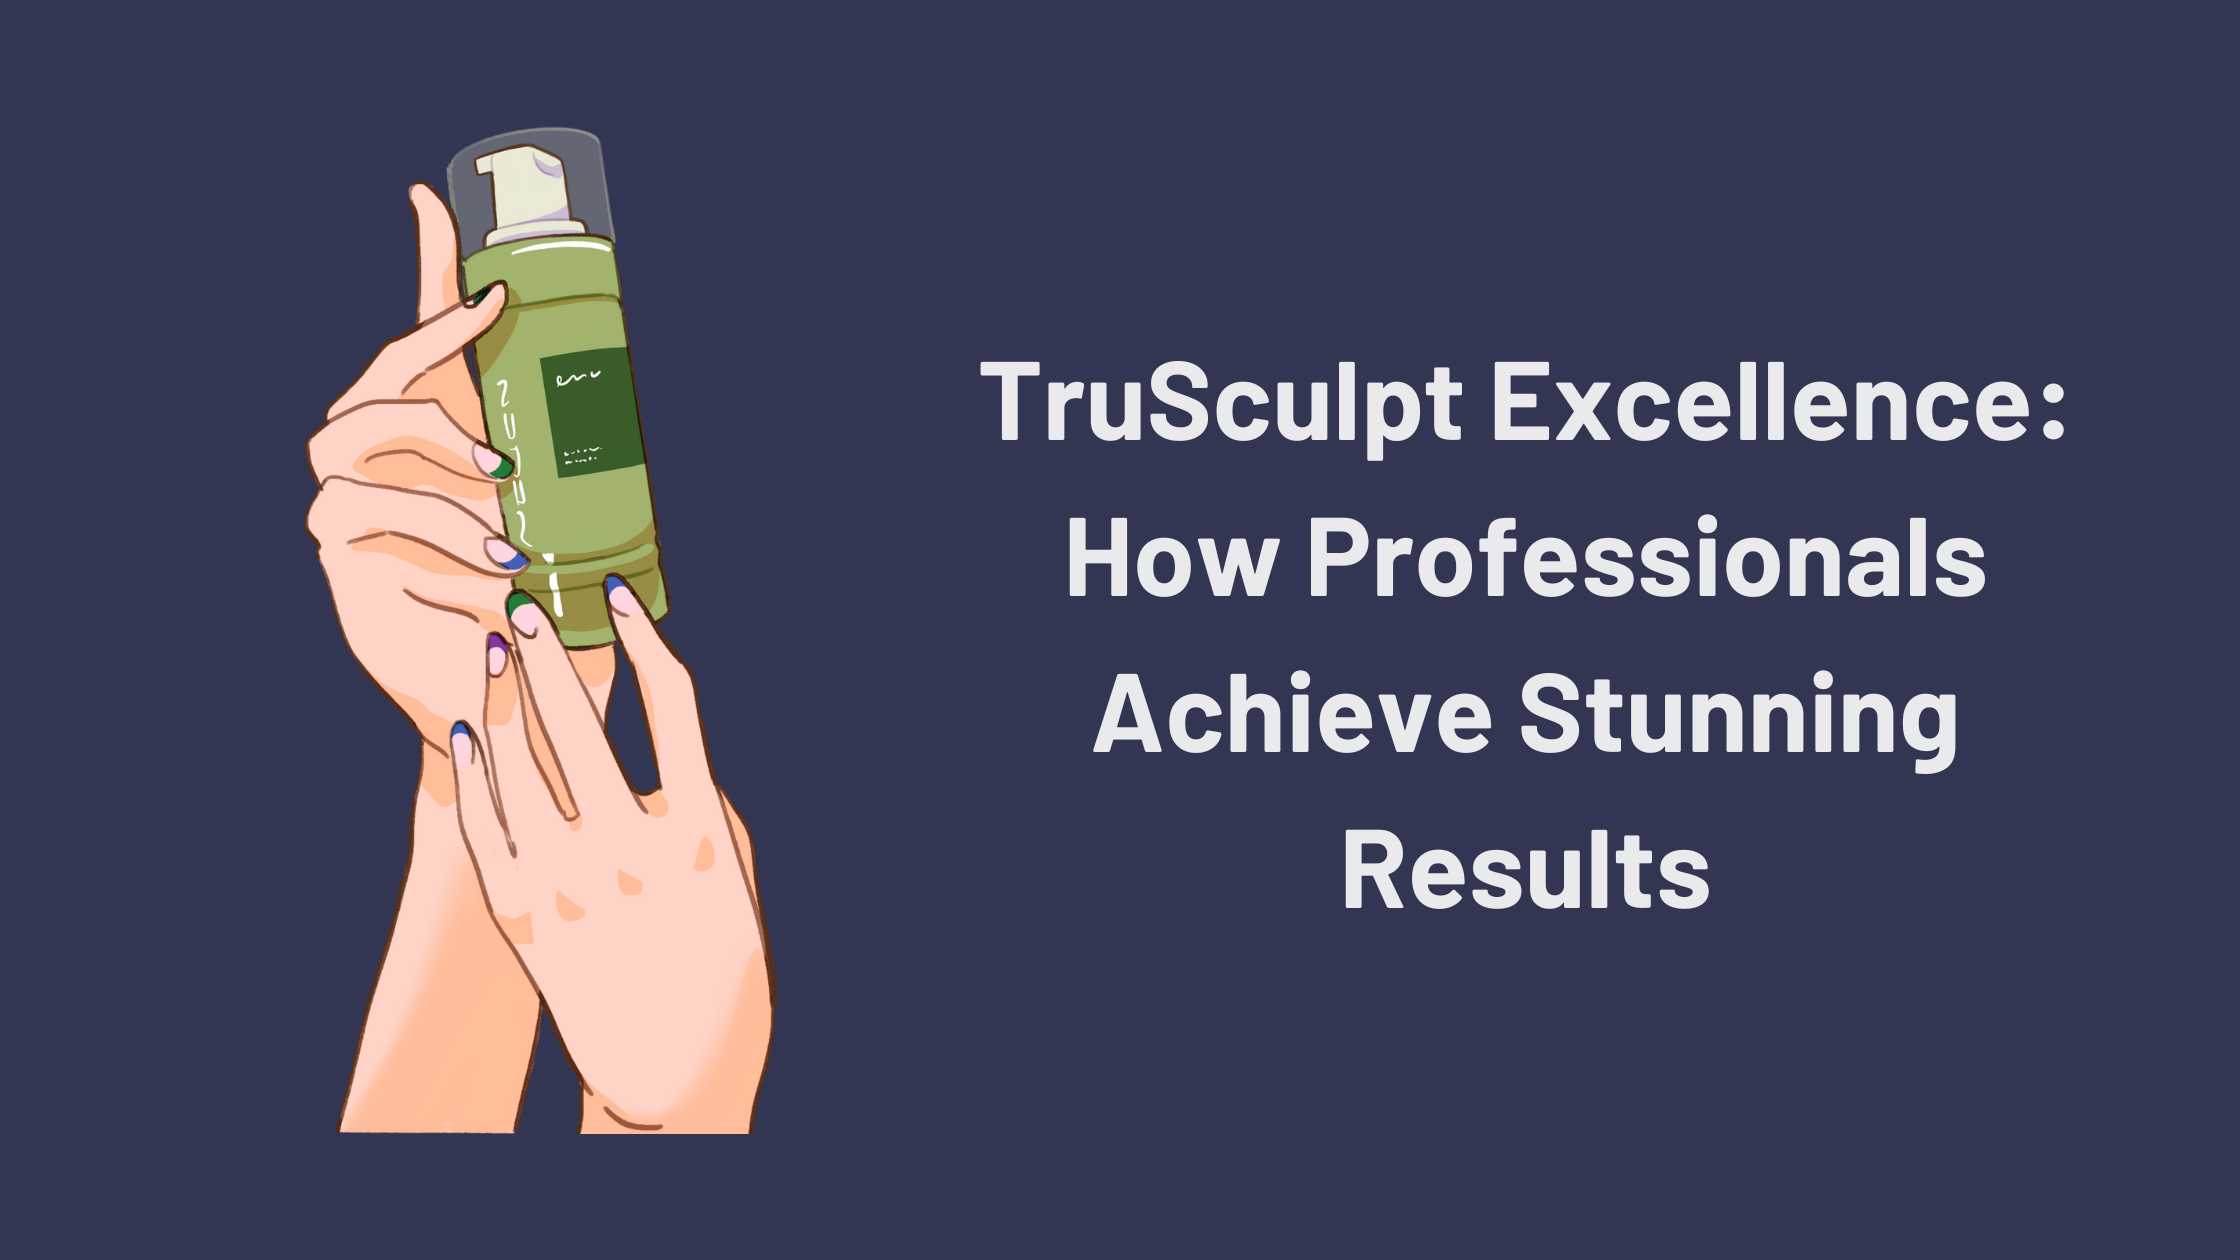 TruSculpt Excellence: How Professionals Achieve Stunning Results